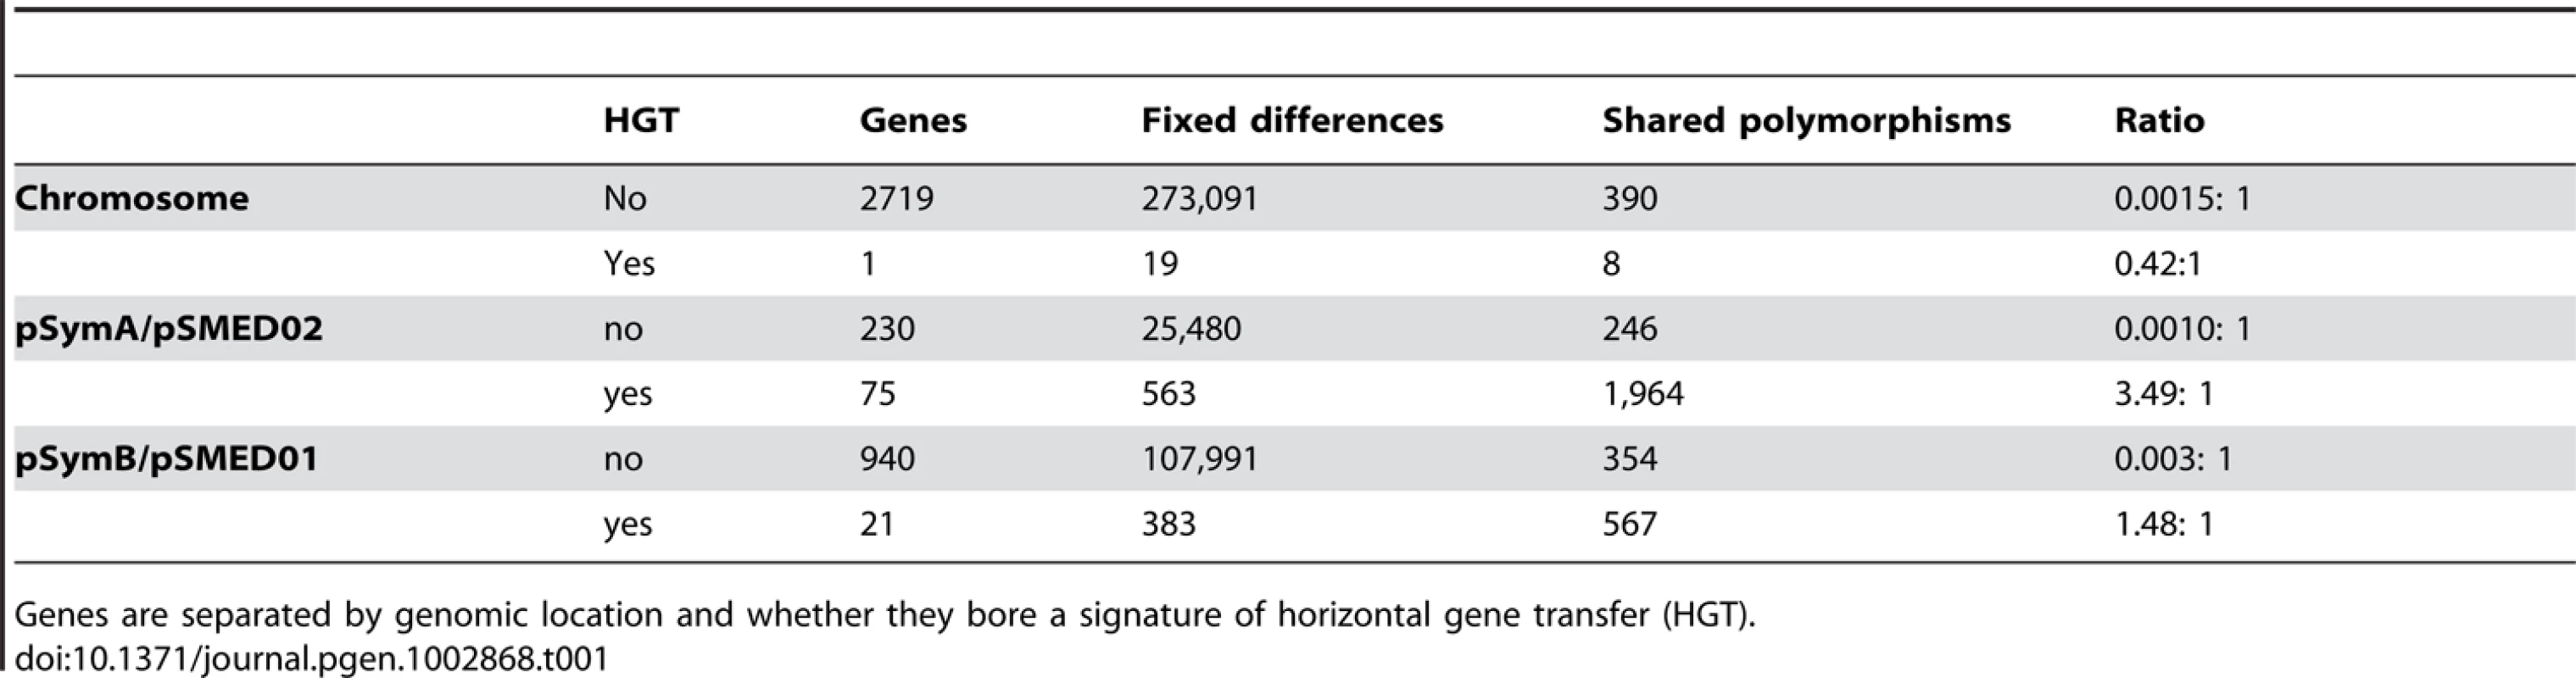 Number of fixed differences and shared polymorphisms and the ratio of shared polymorphisms to fixed differences between <i>S. meliloti</i> and <i>S. medicae</i> protein coding genes.